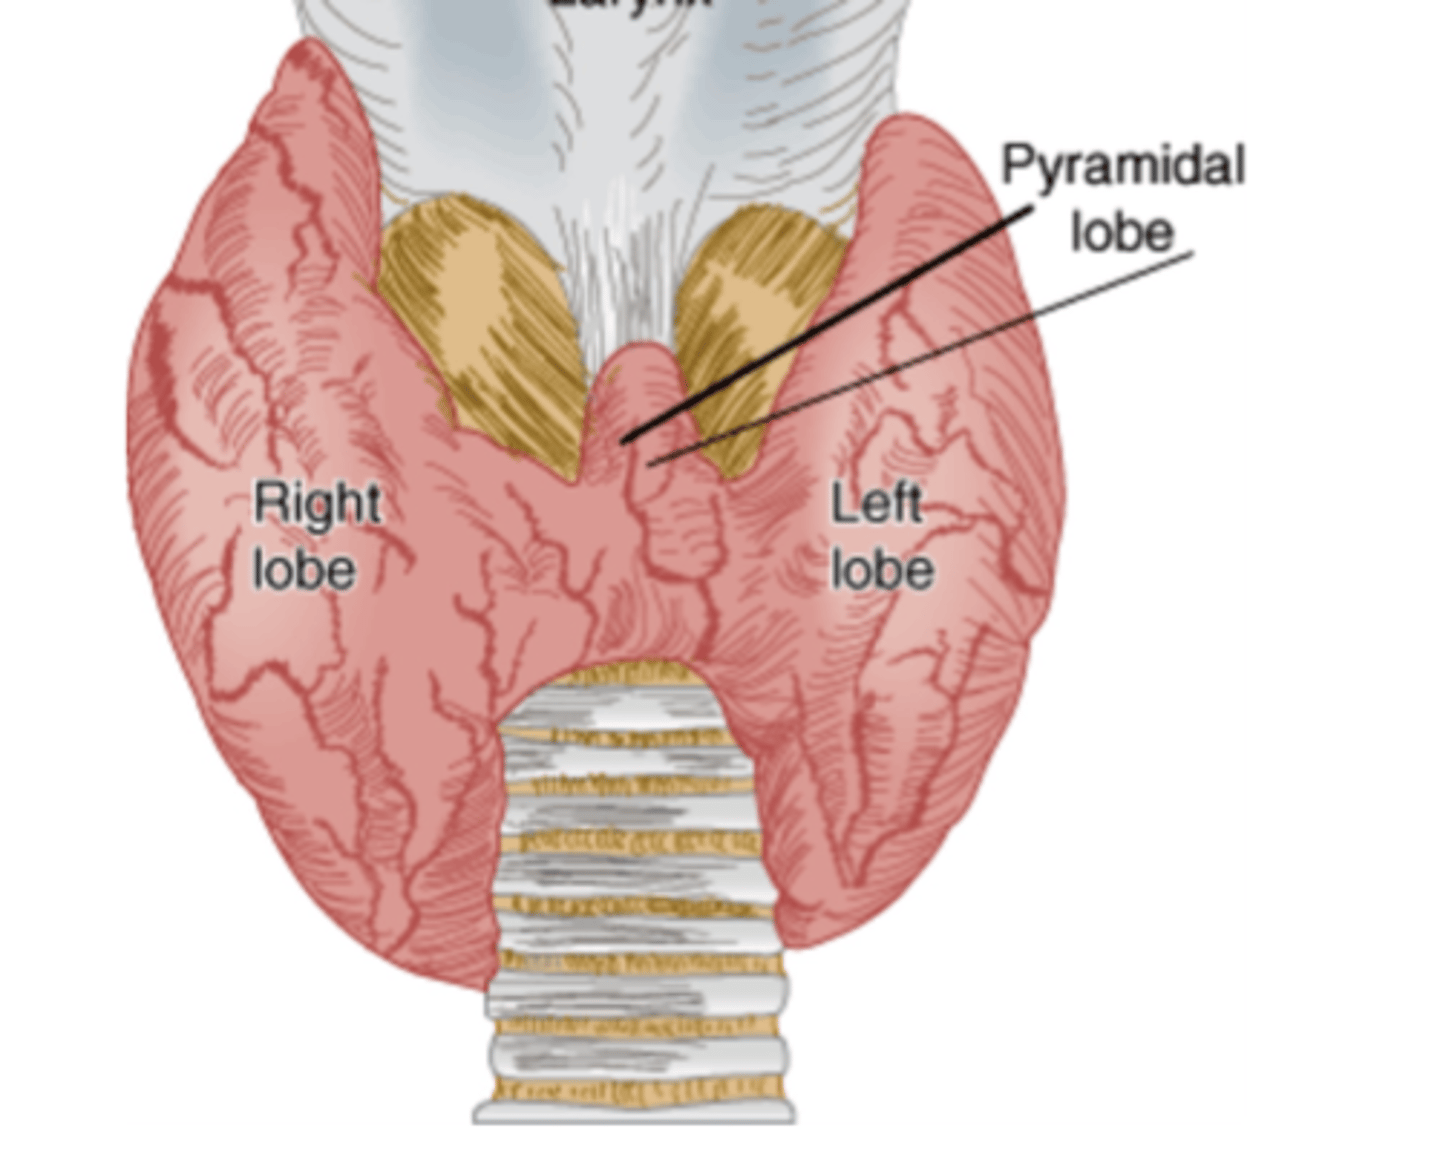 <p>• Largest endocrine gland</p><p>• Two lateral lobes, 4 to 6cm in length</p><p>• Connected by isthmus (~5cm)</p><p>• Highly vascularized</p><p>in a healthy person you shouldn't be able to feel it</p>